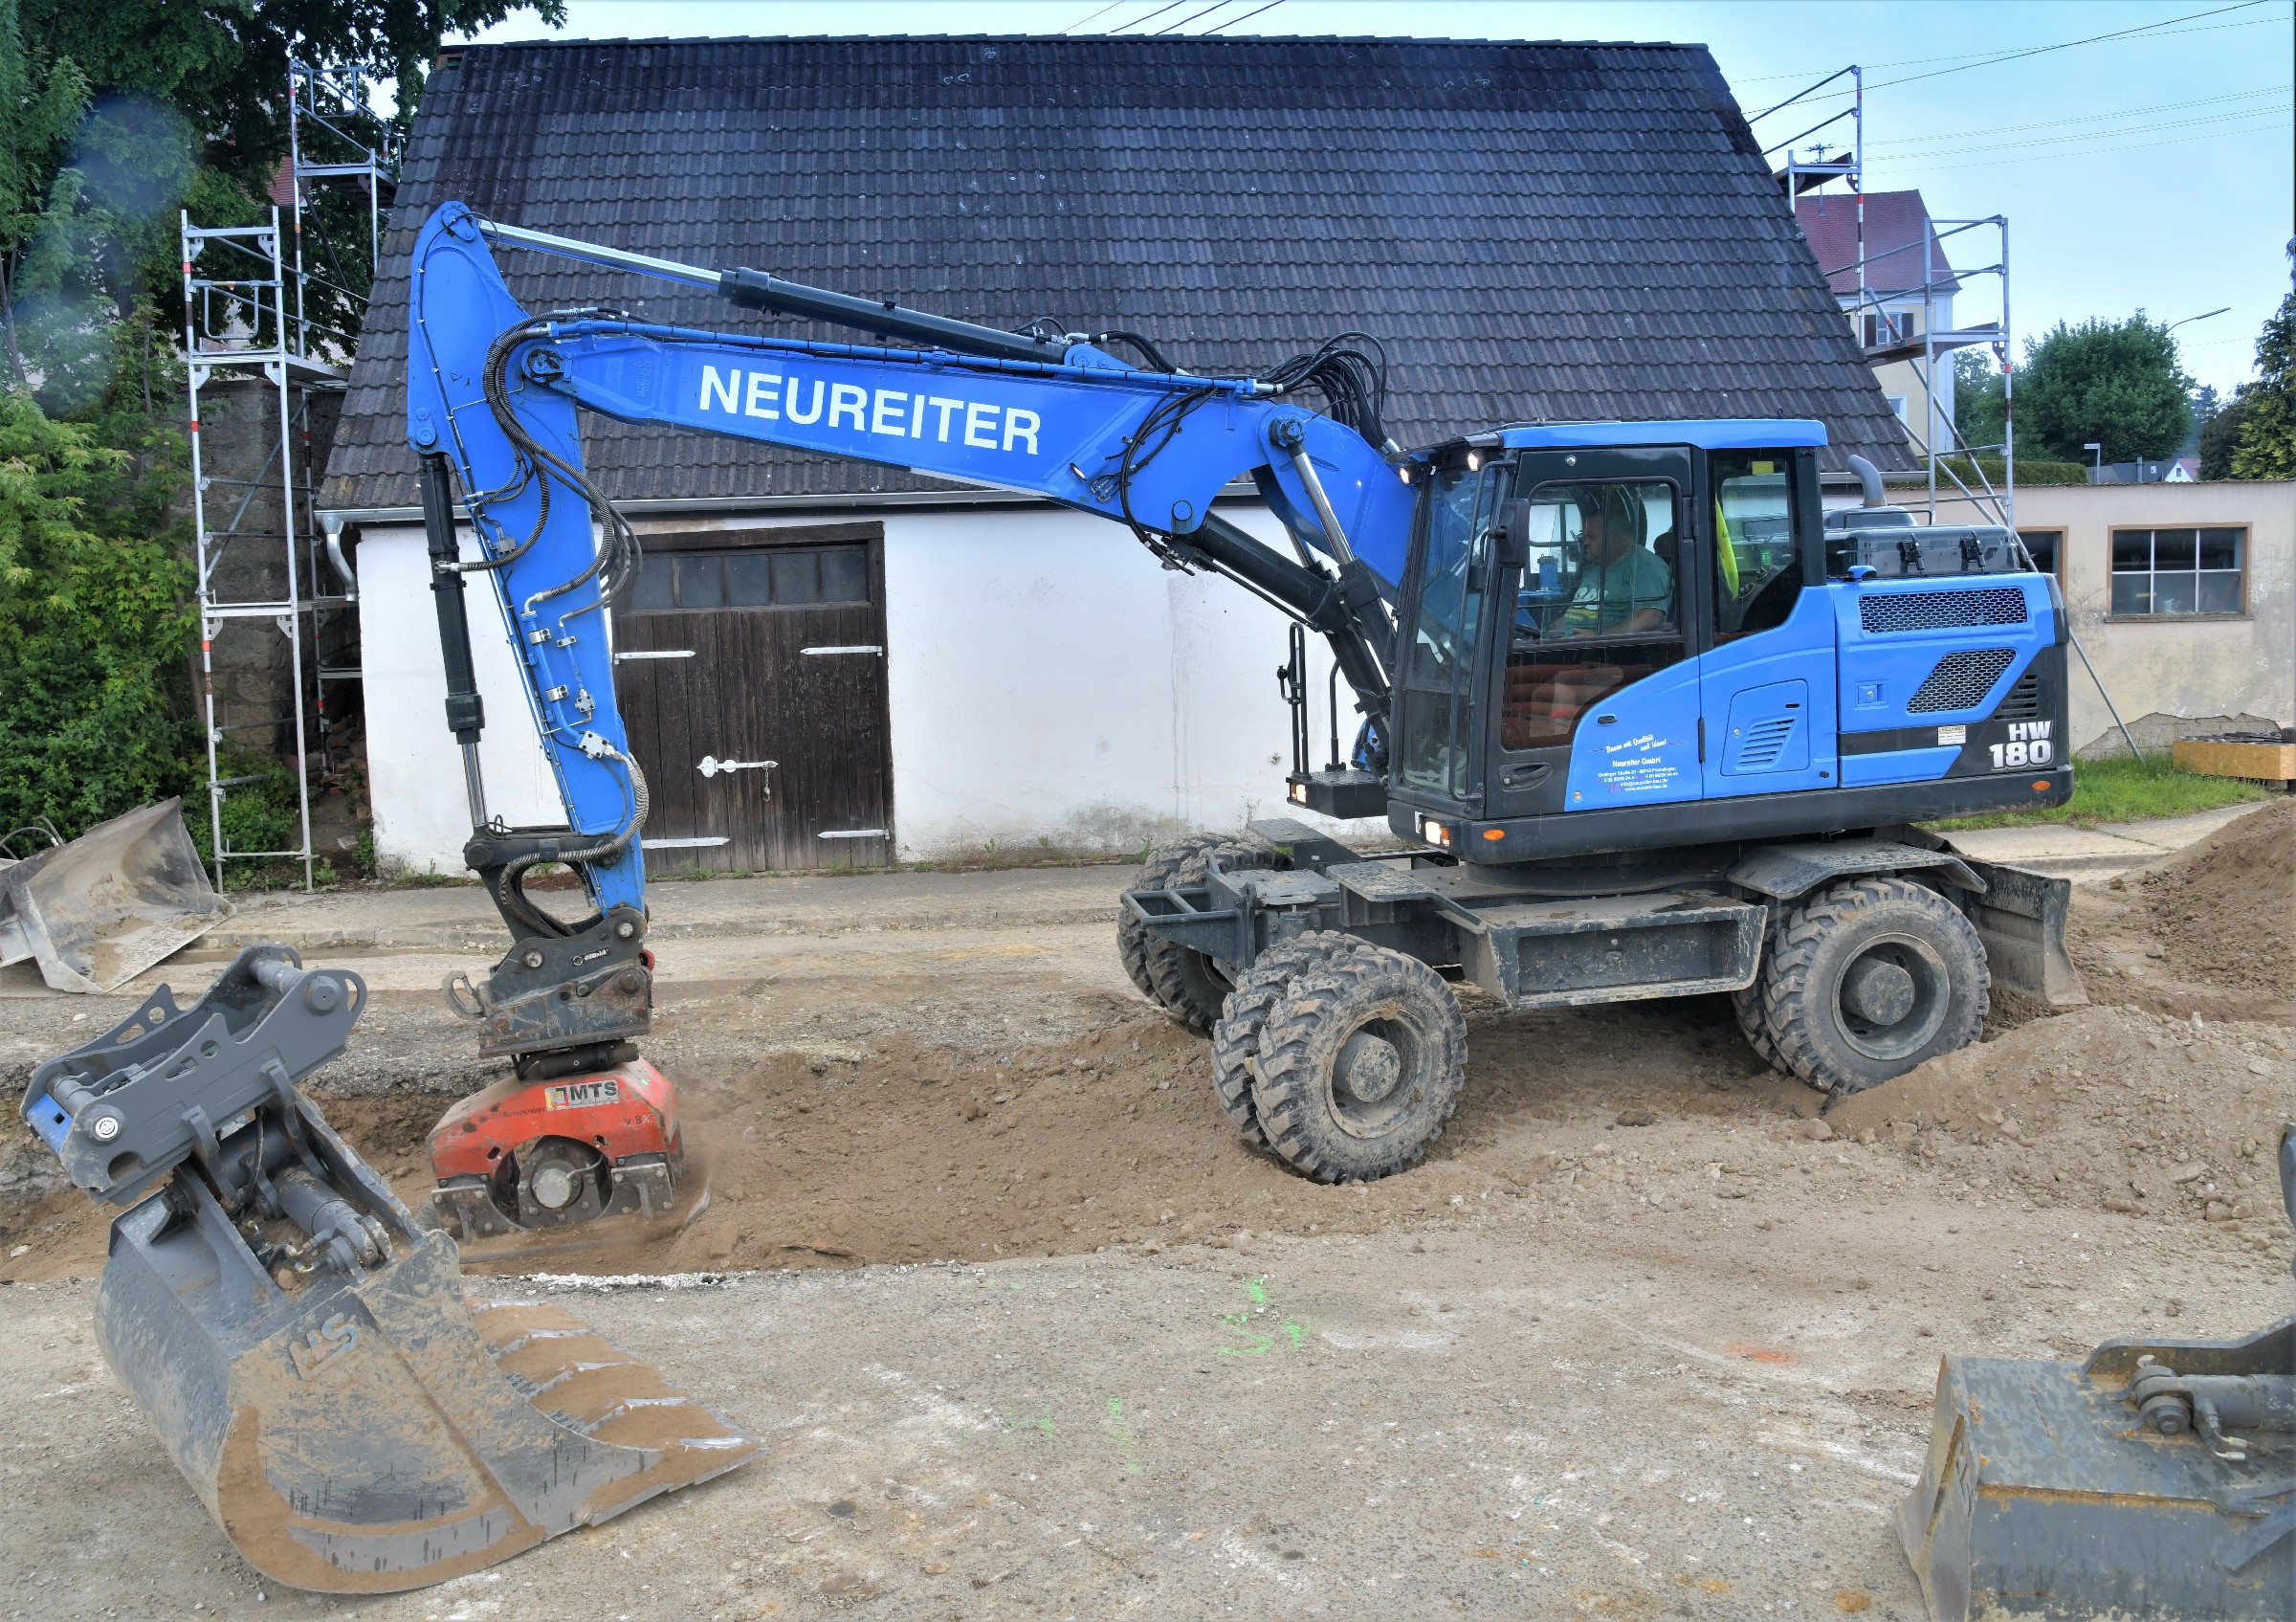 The Hyundai HW180 wheeled excavator at work replacing a 2,500-metre-long main  sewerage line in Minderoffingen. Compacting a freshly filled trench with a vibrator  attachment.